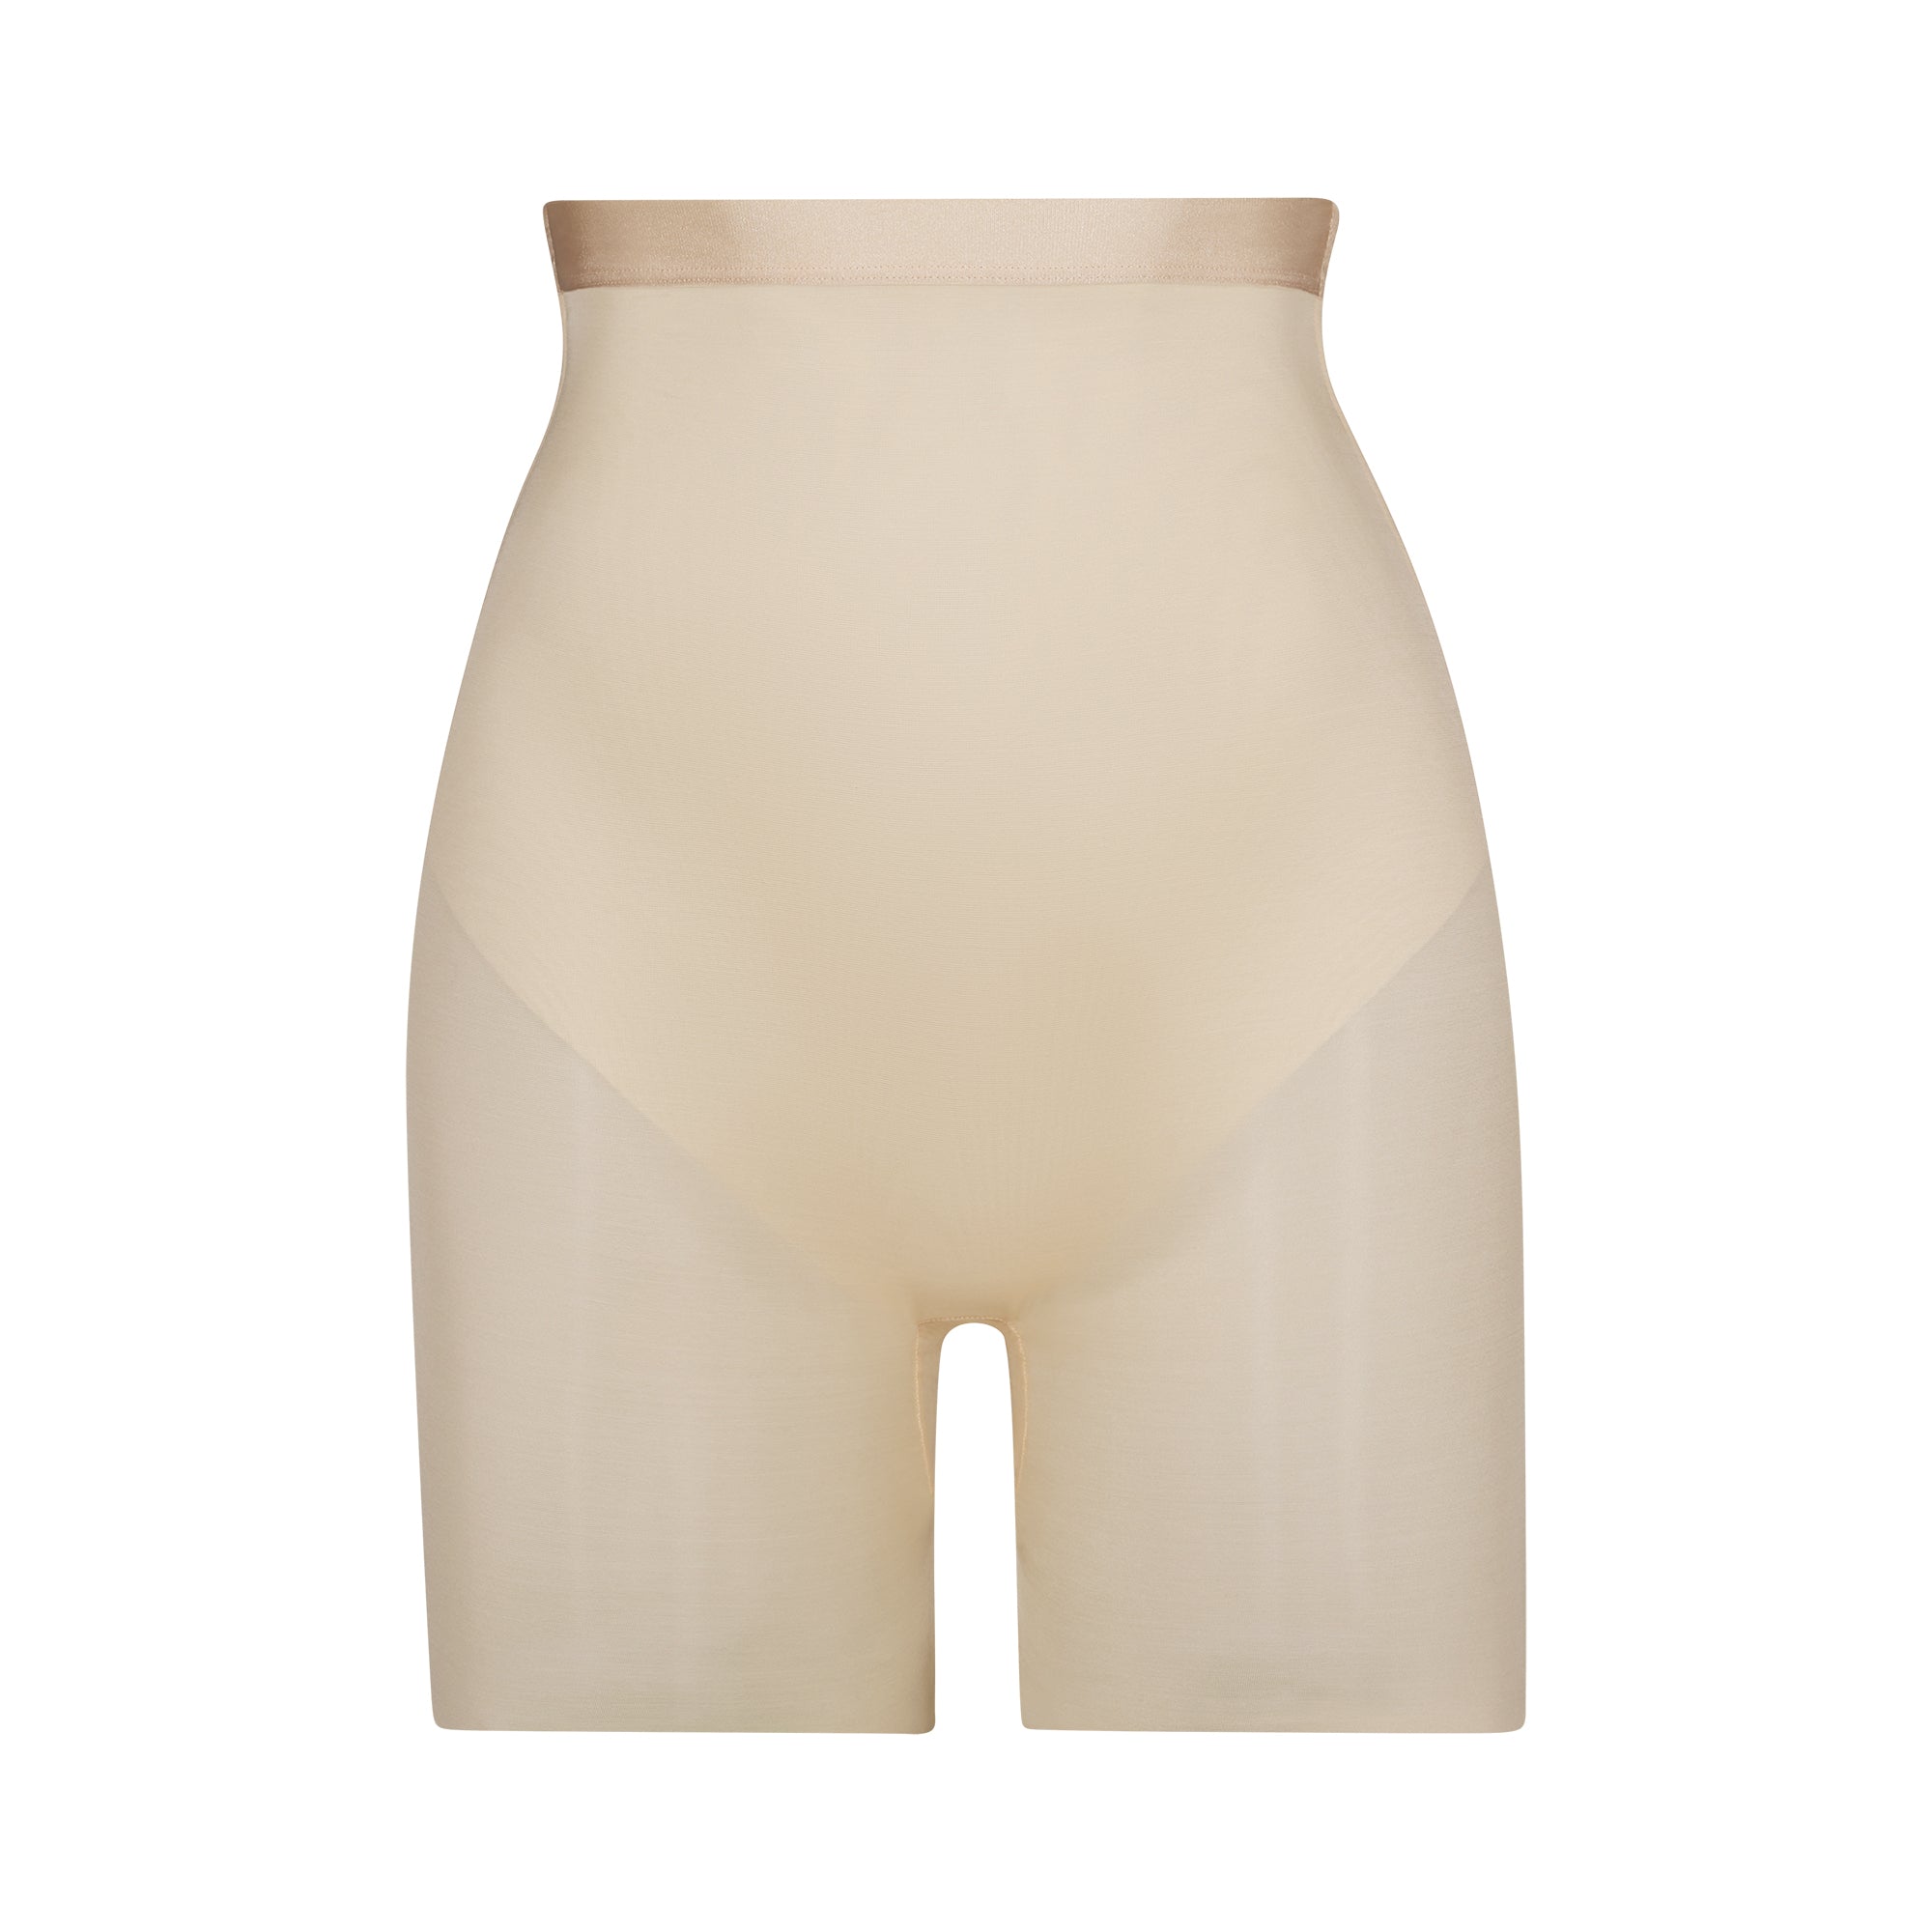 Barely There Low Back Short - Sand